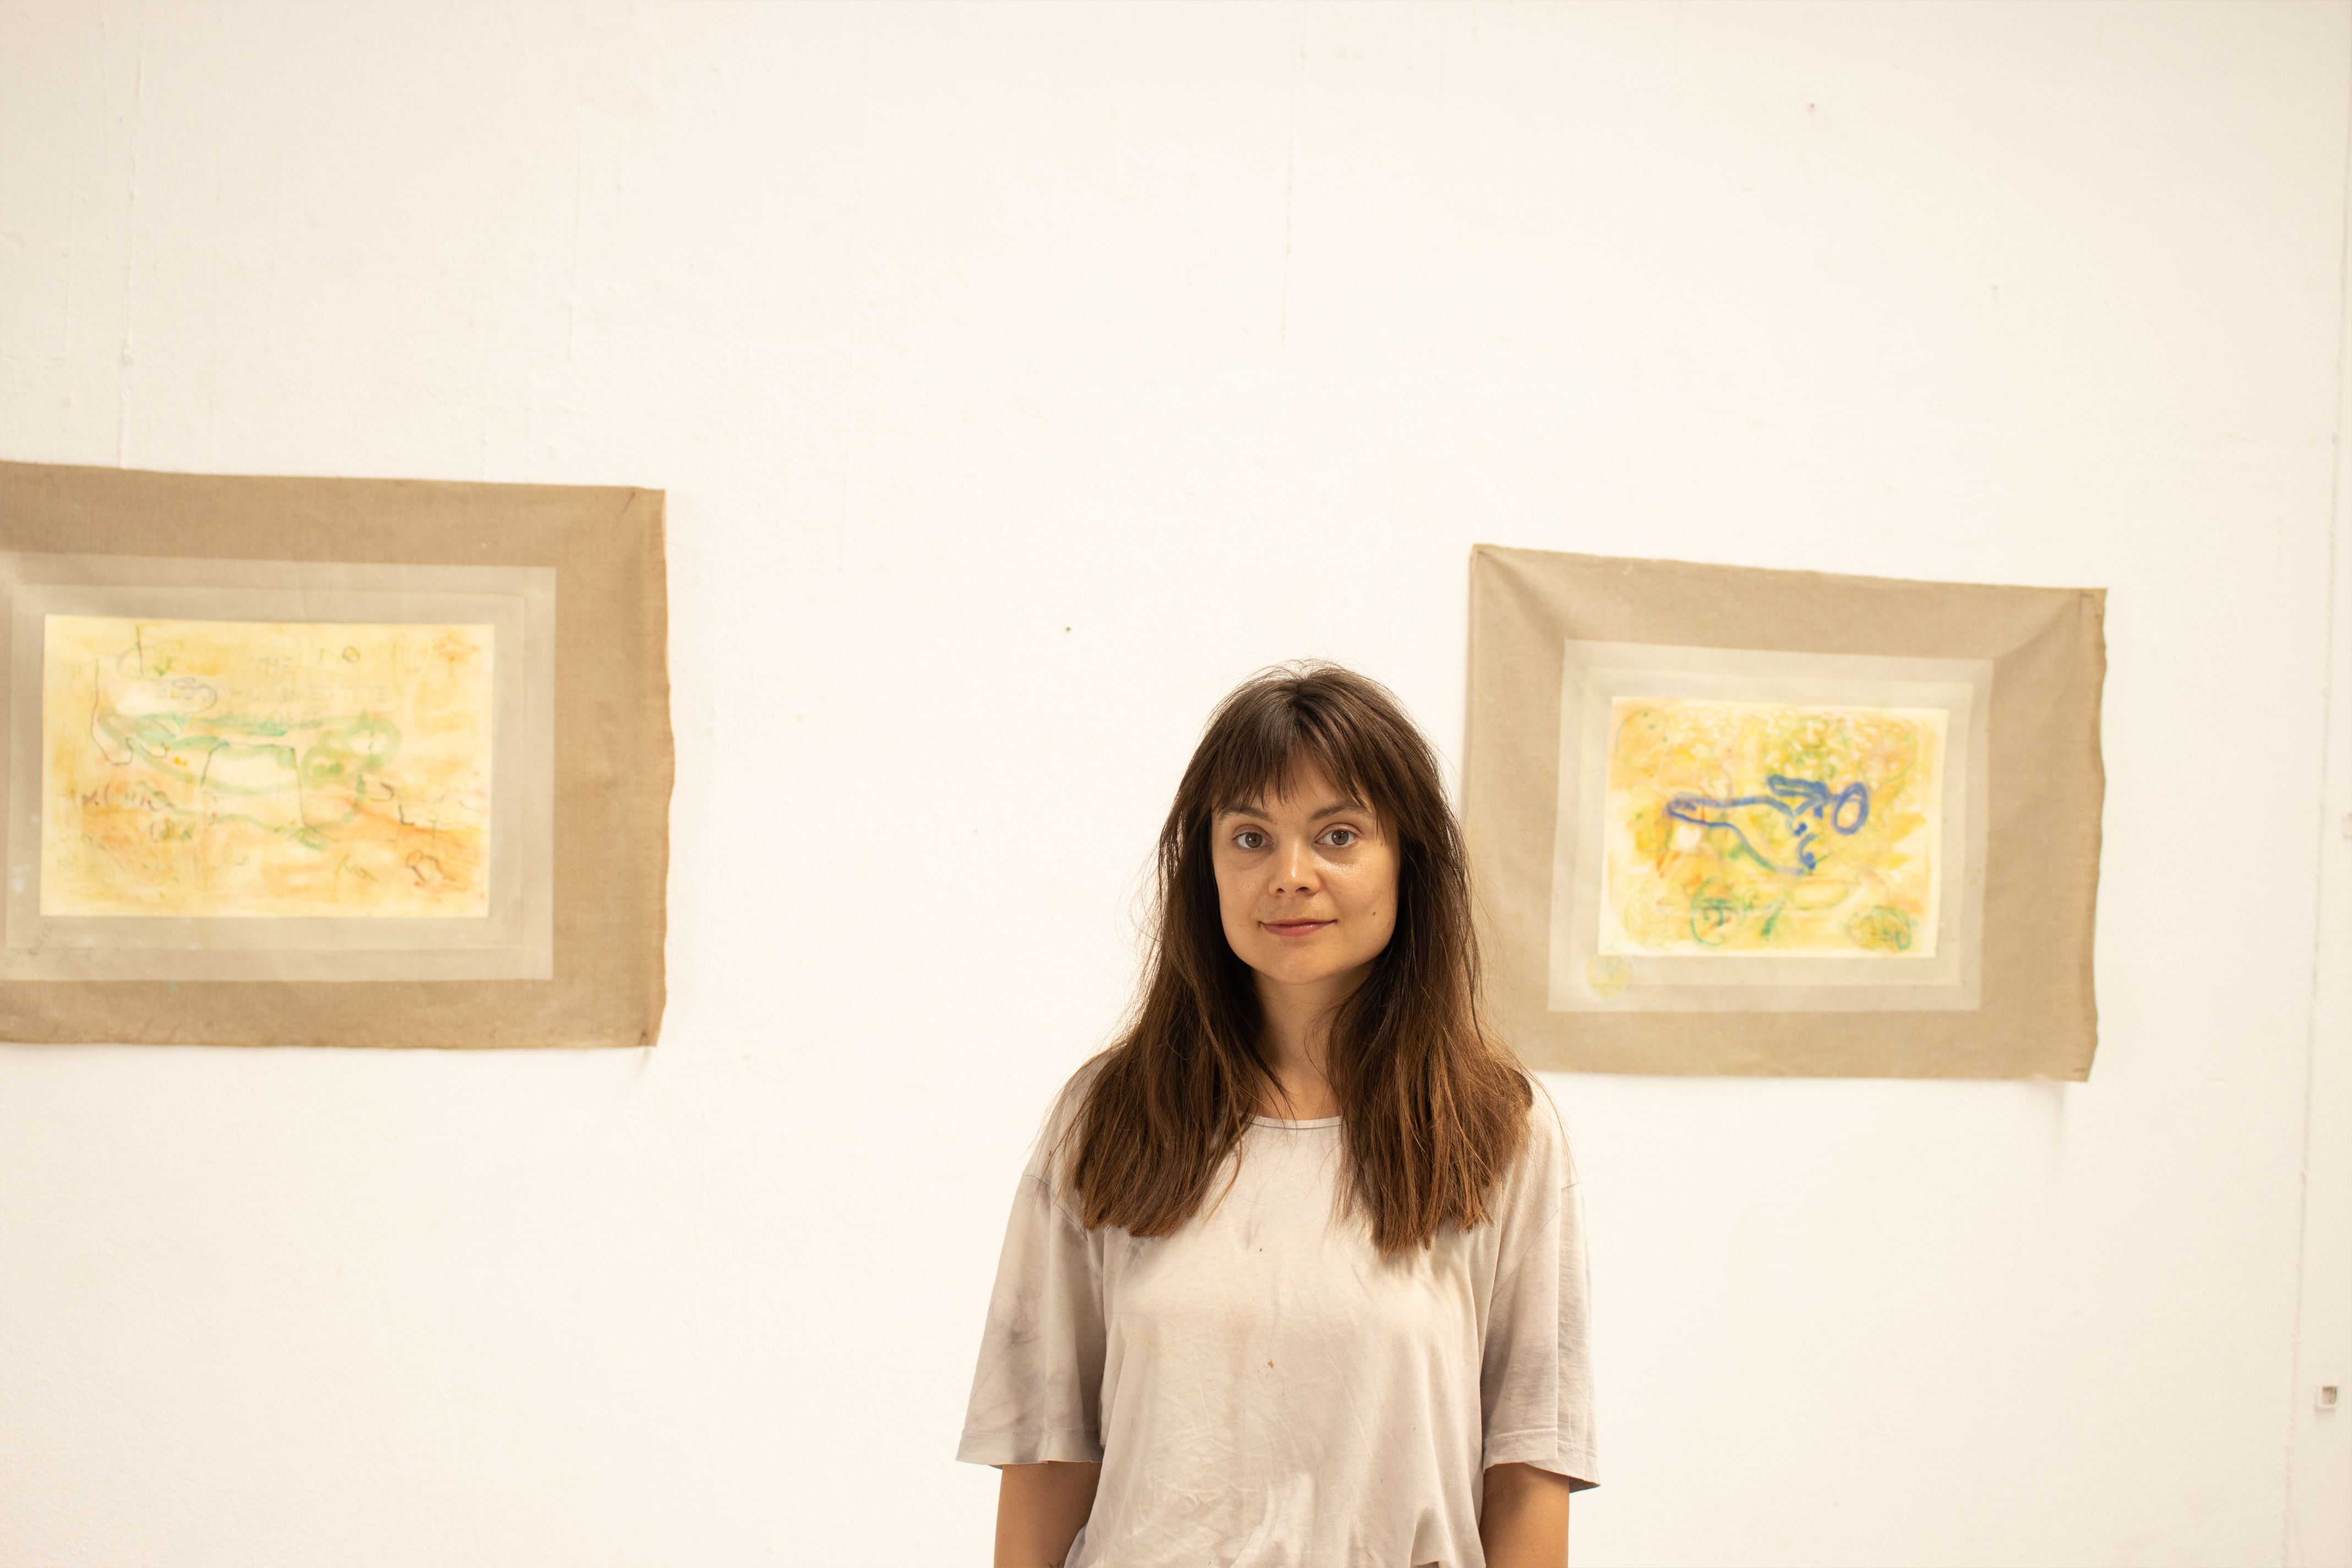 A white woman with long brown hair standing in front of two wall mounted artworks